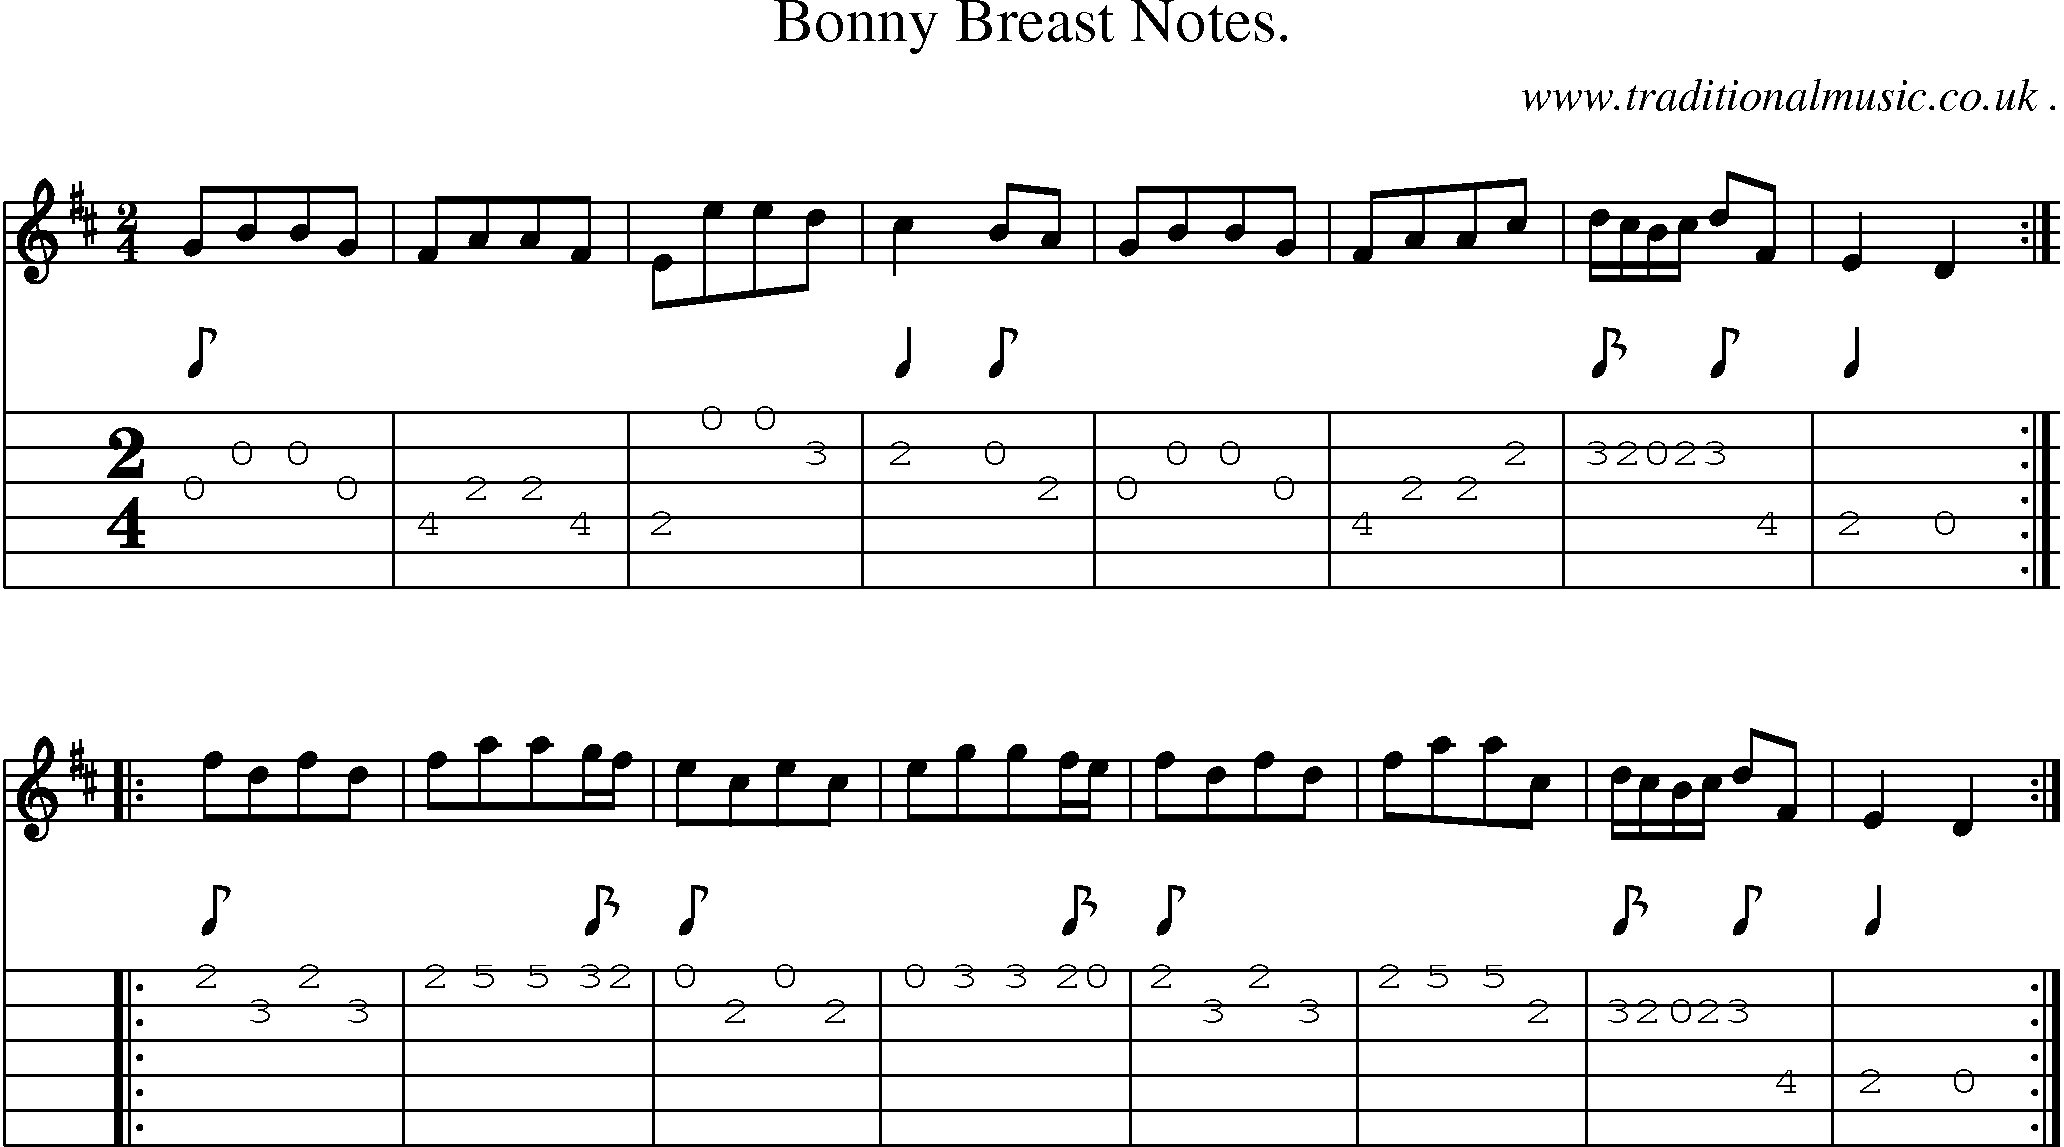 Sheet-Music and Guitar Tabs for Bonny Breast Notes